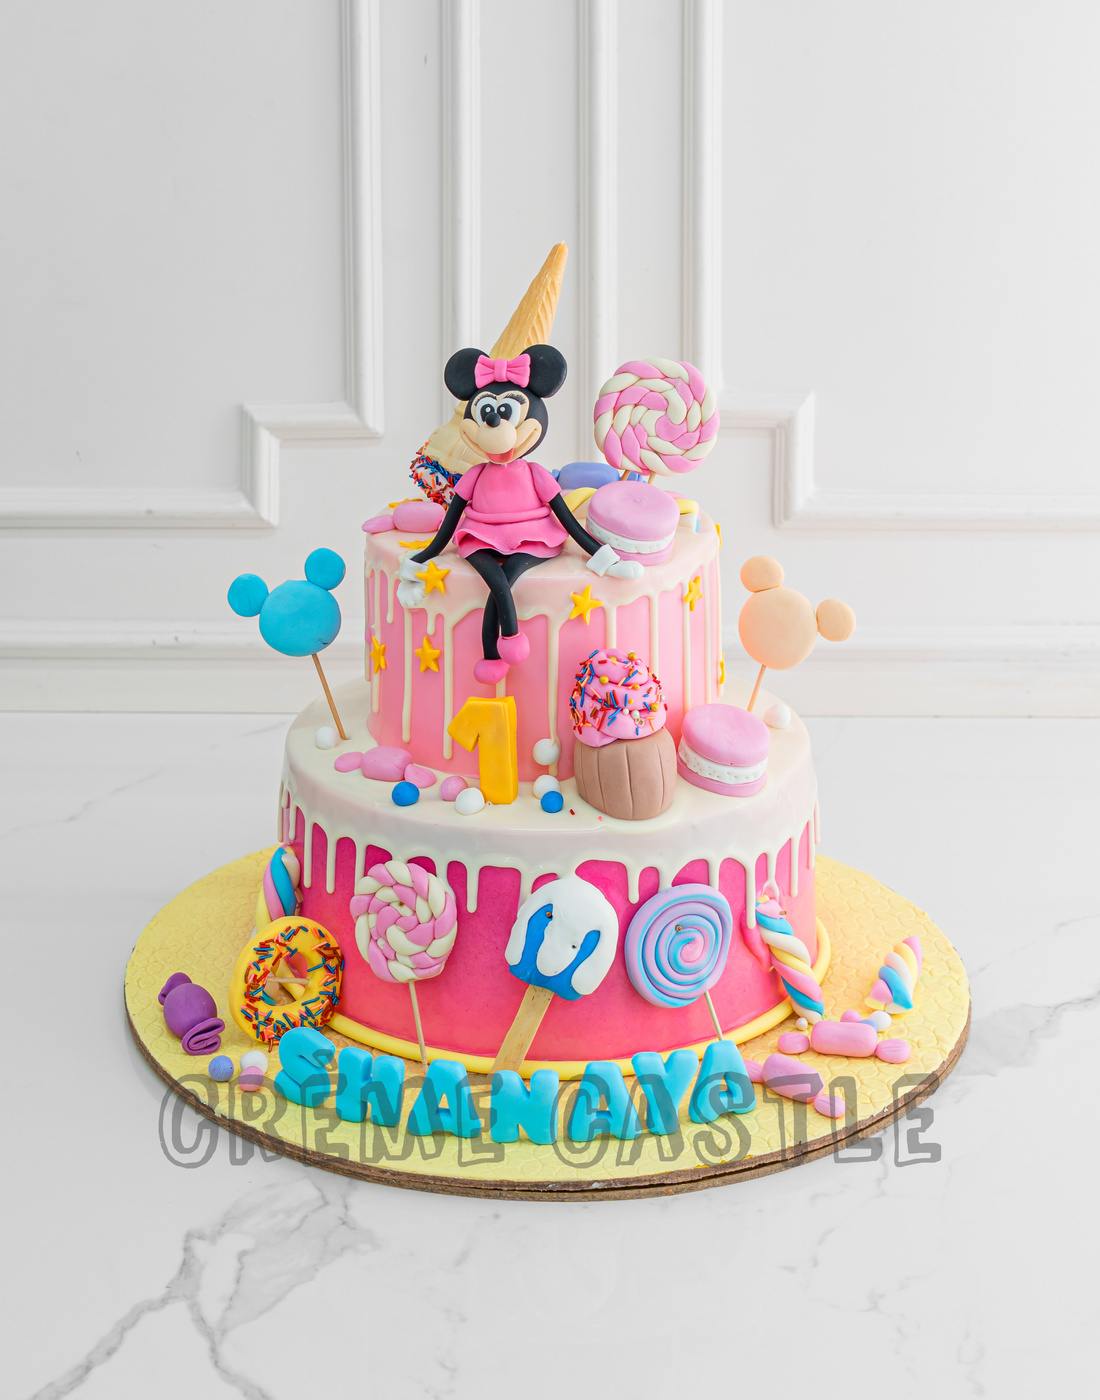 Mickey Mouse / Minnie Mouse Cake Topper Acrylic Cake Decoration | eBay